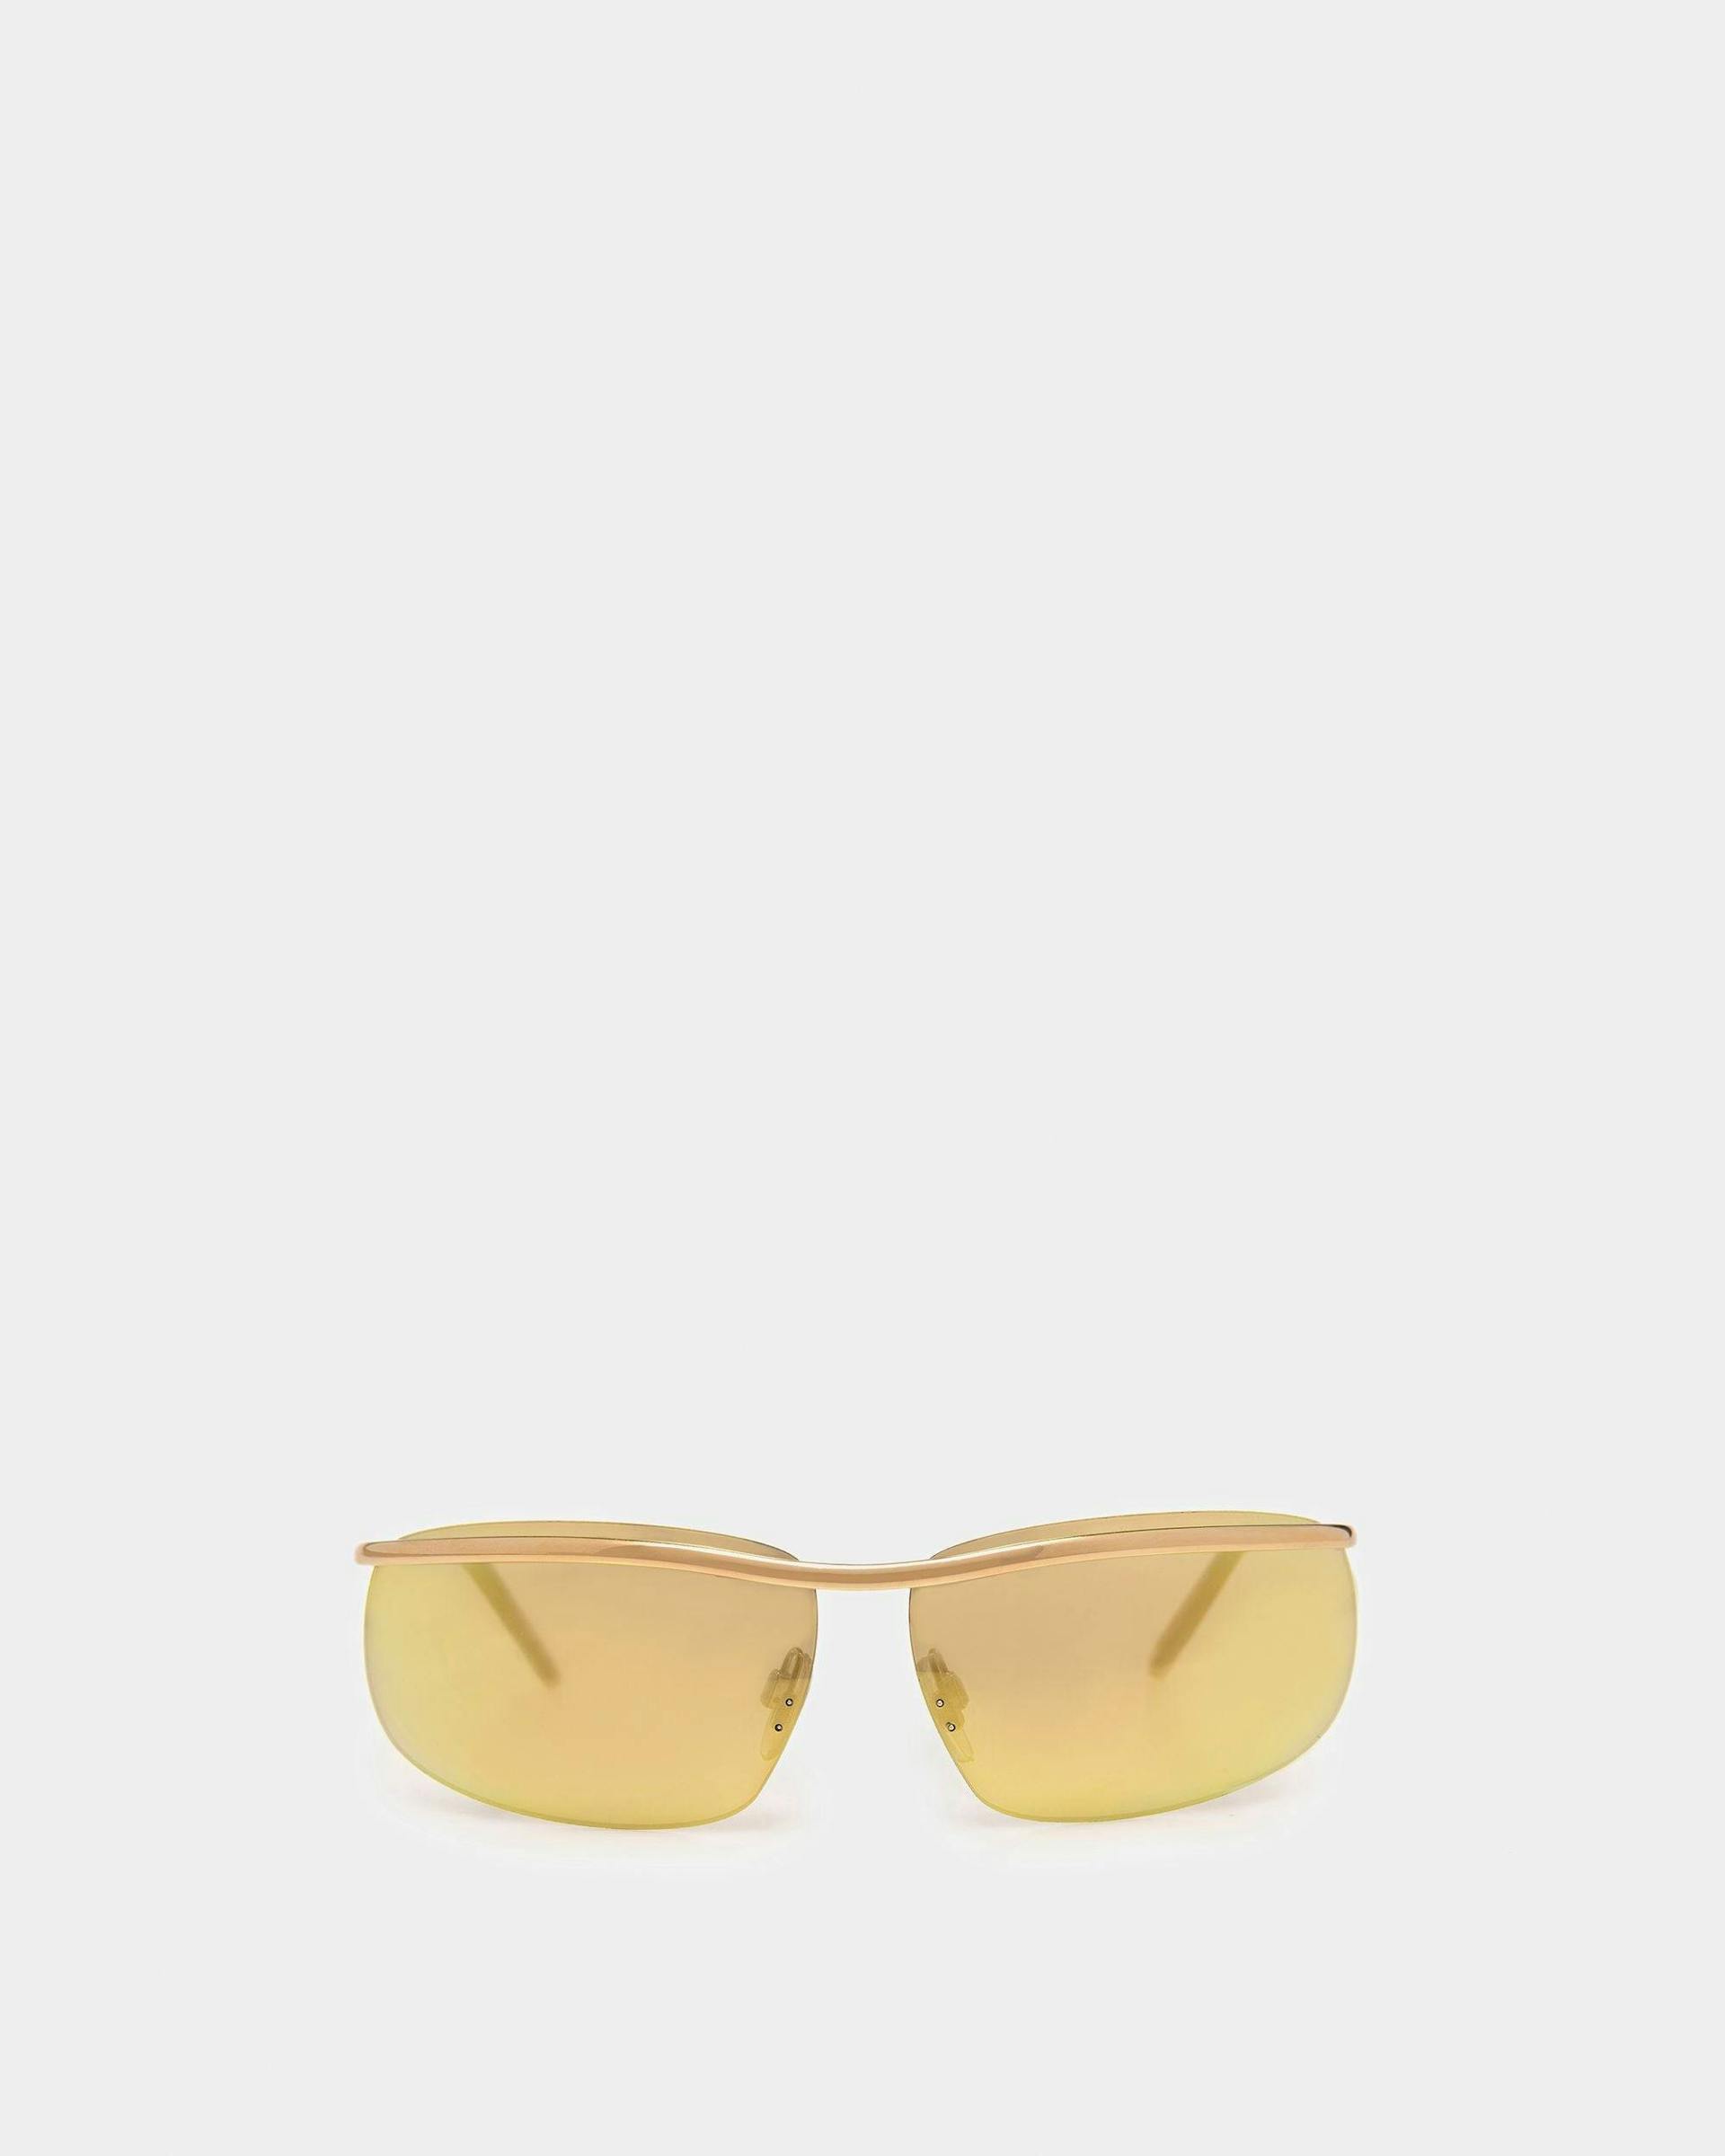 SUNGLASSES - OTHER - Bally - 01